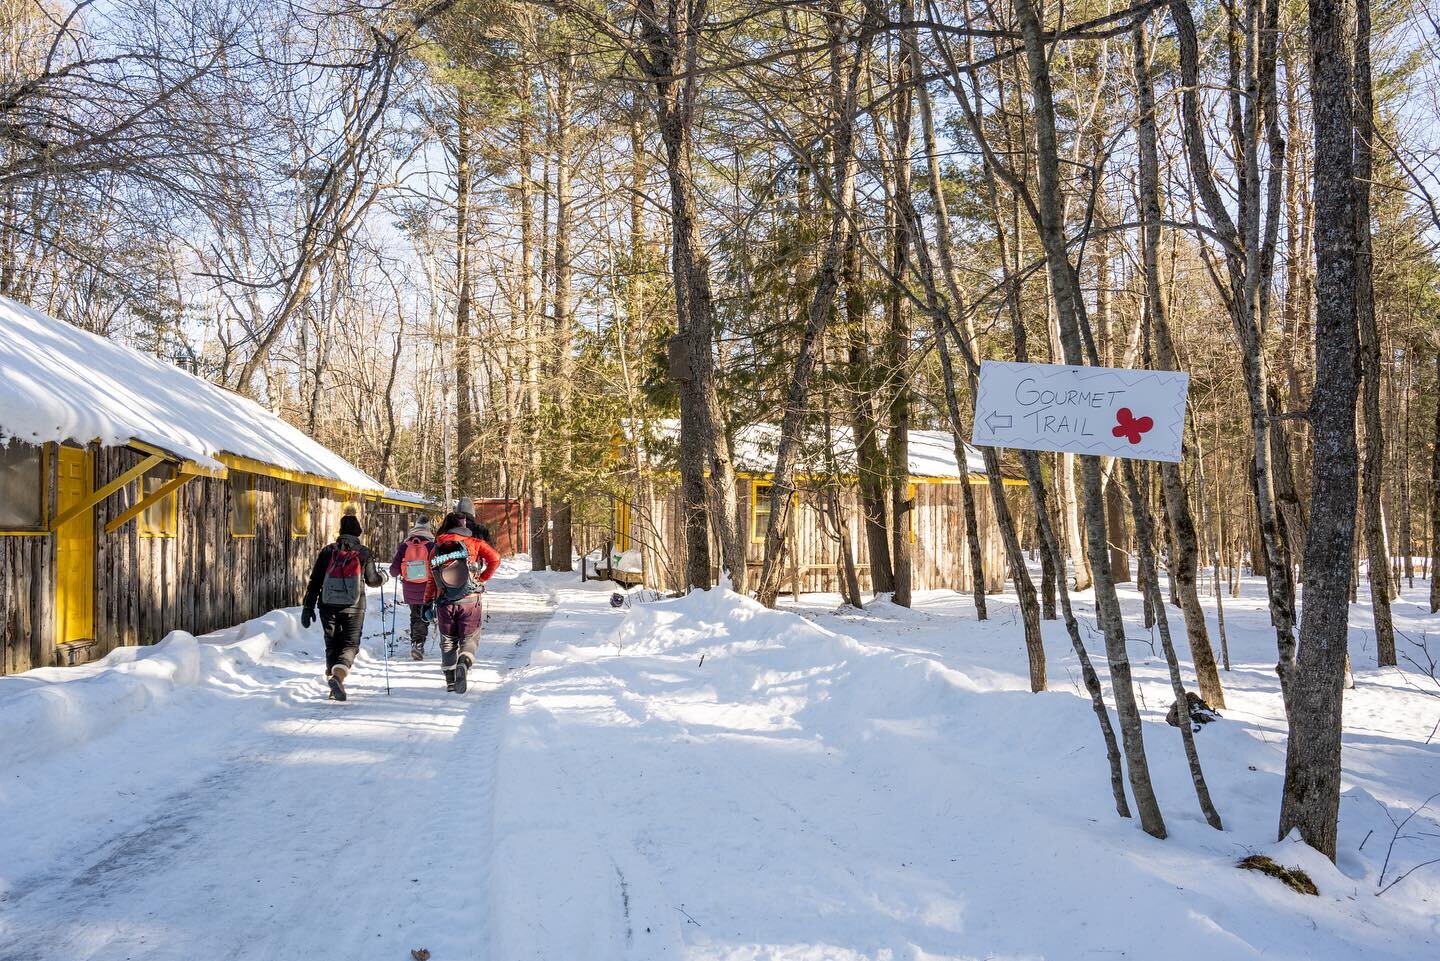 🎉 A Heartfelt Thank You to Everyone Who Joined Us at the Gourmet March&eacute;! 🍴 Despite the chilly weather and less-than-ideal snow conditions for snowshoeing, your enthusiasm and support shone through as you explored the trails with big smiles! 